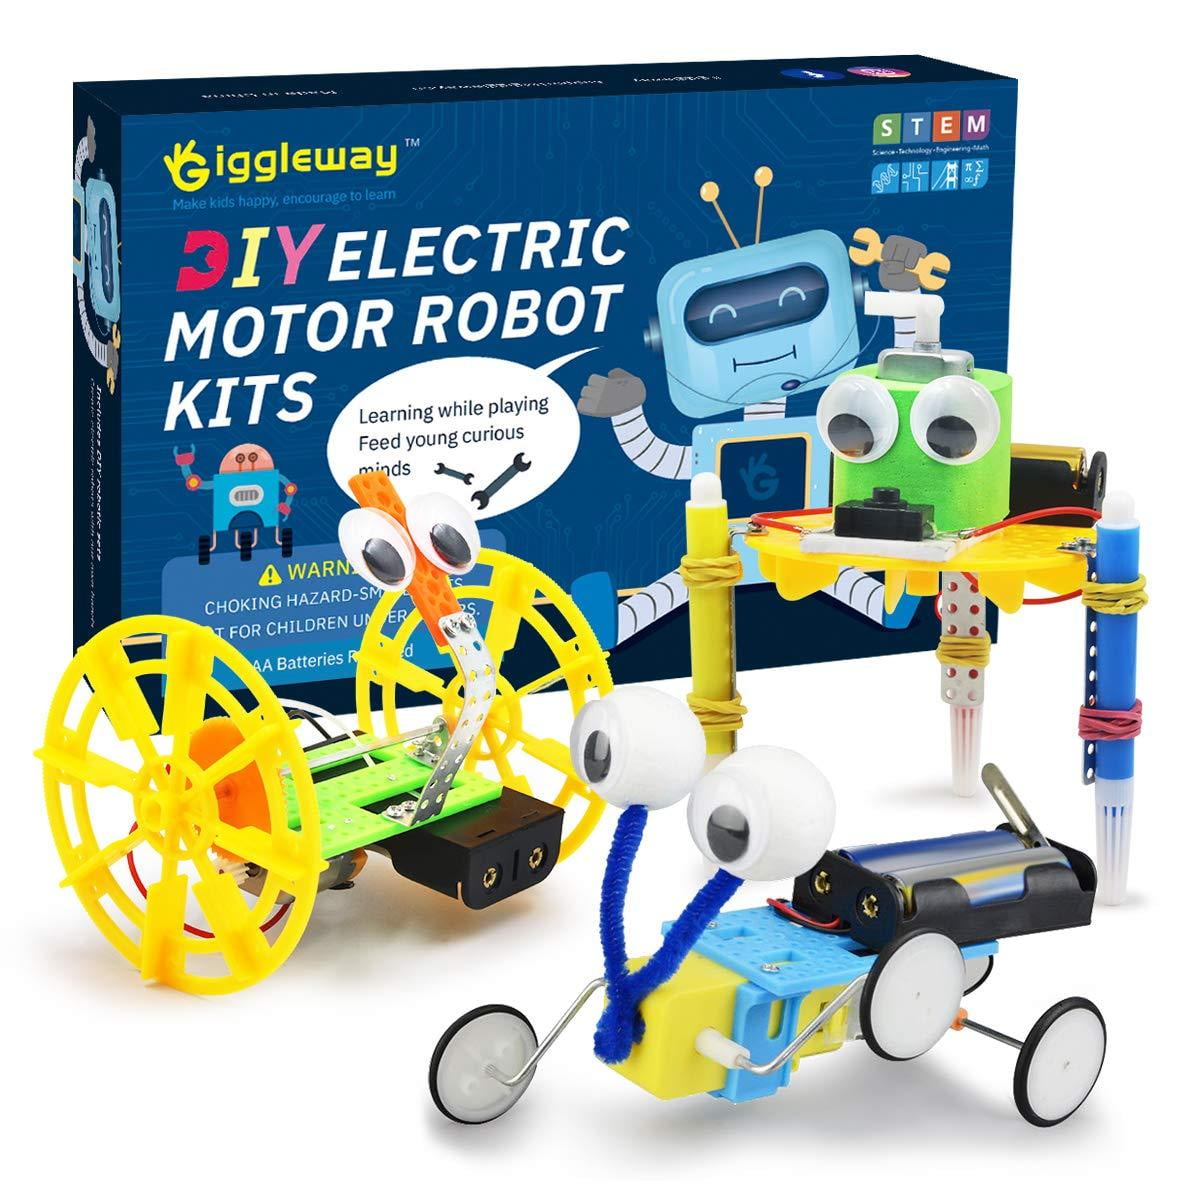 CIRO Robot Building Kits for Kids STEM Remote Control Toys Educational Learning Science Building Gifts for Boys and Girls Ages 8-12 